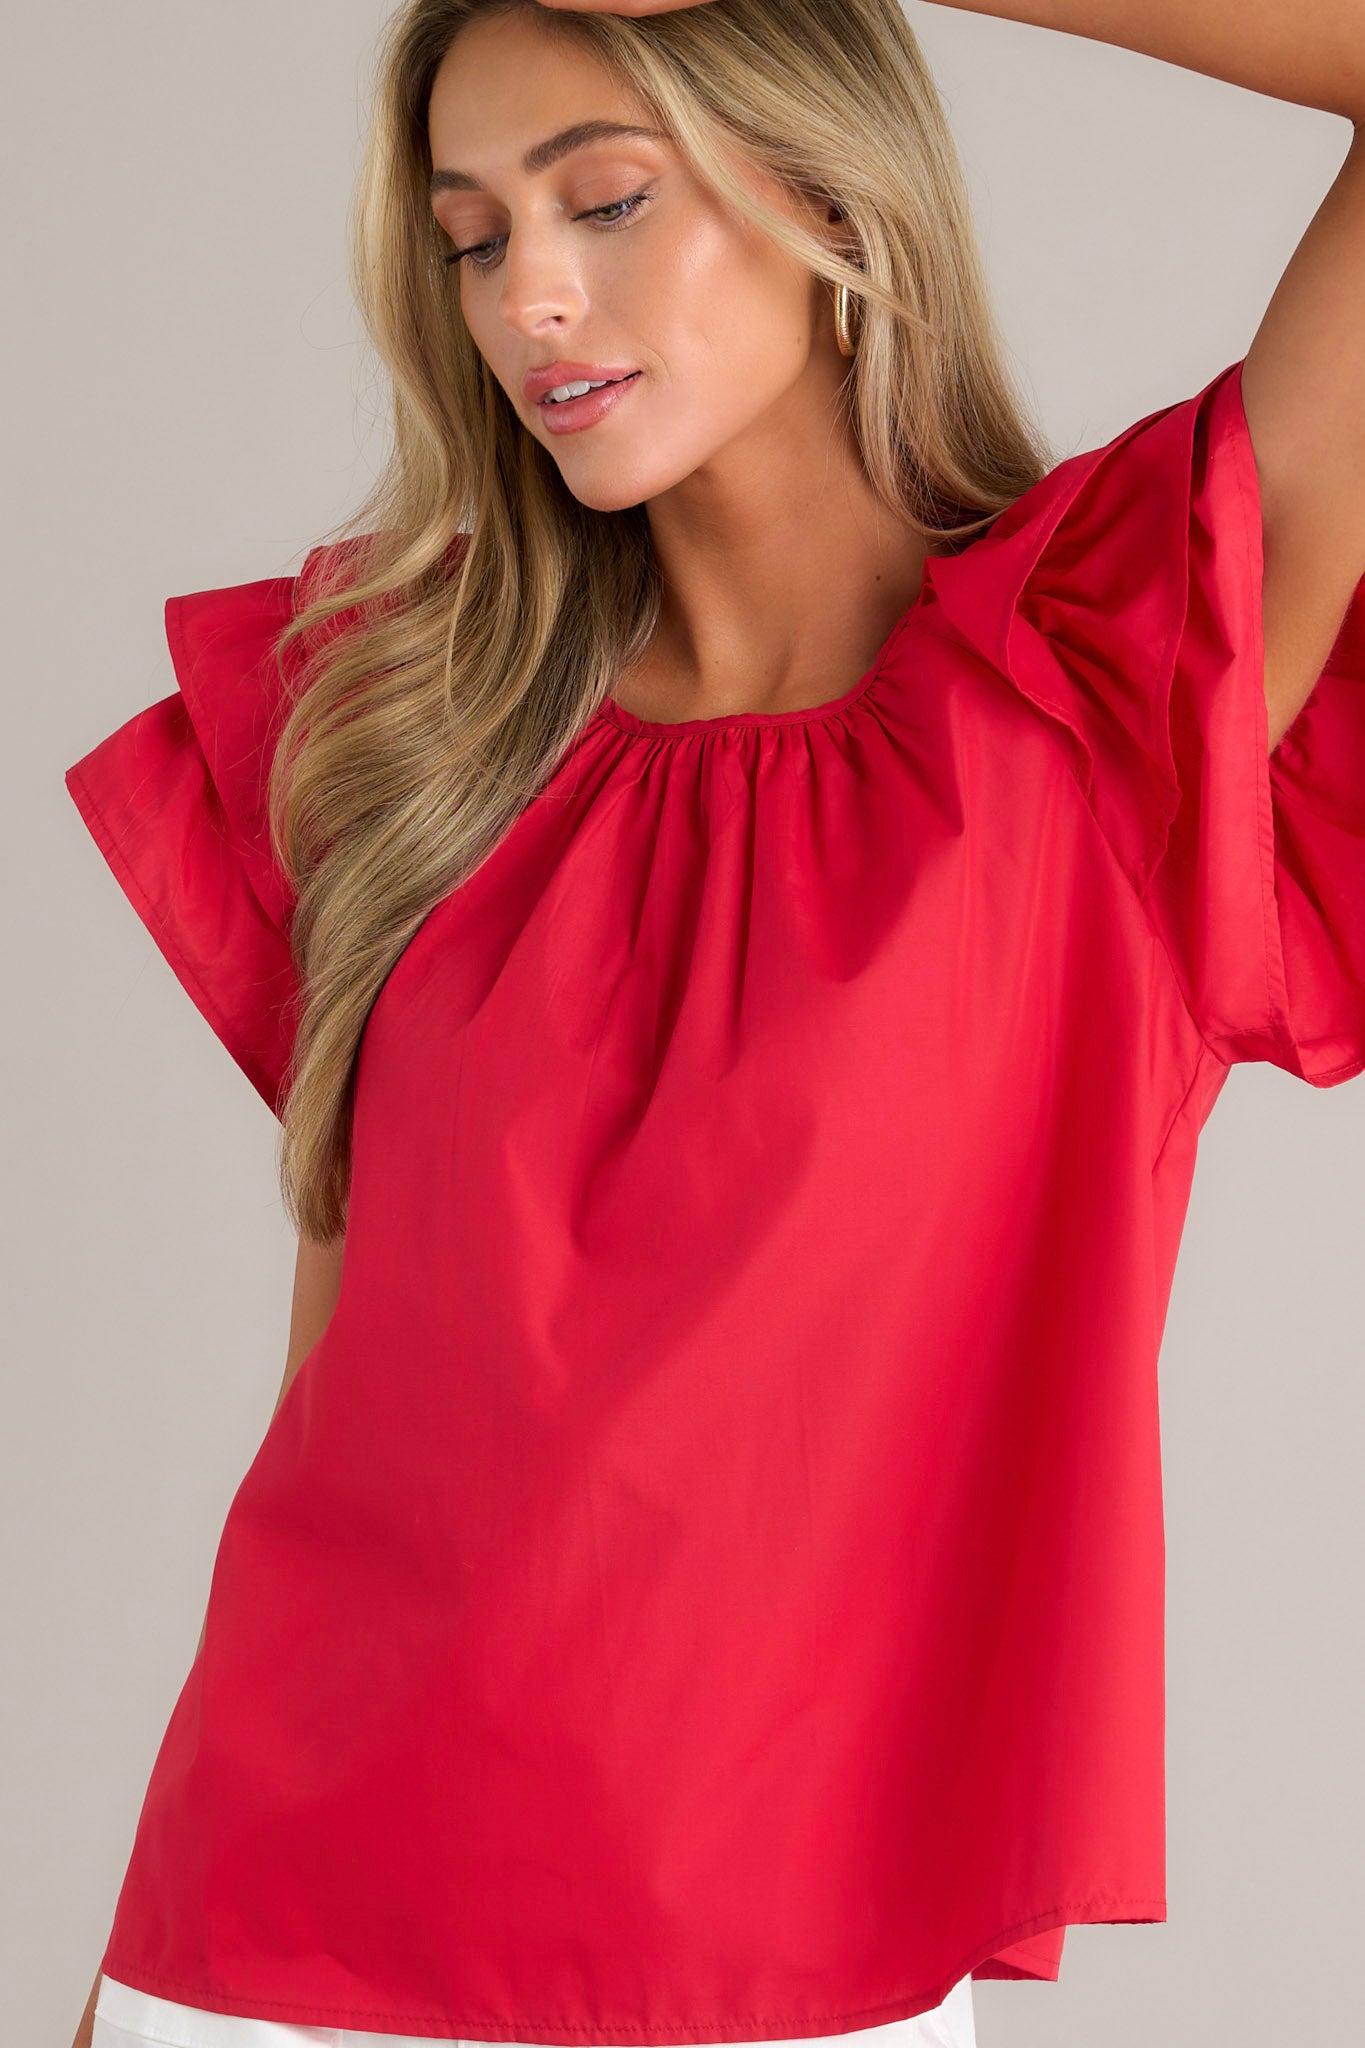 Side view of a red top showcasing the rounded neckline, gathering at the neckline, keyhole with a button closure, and ruffled short sleeves.